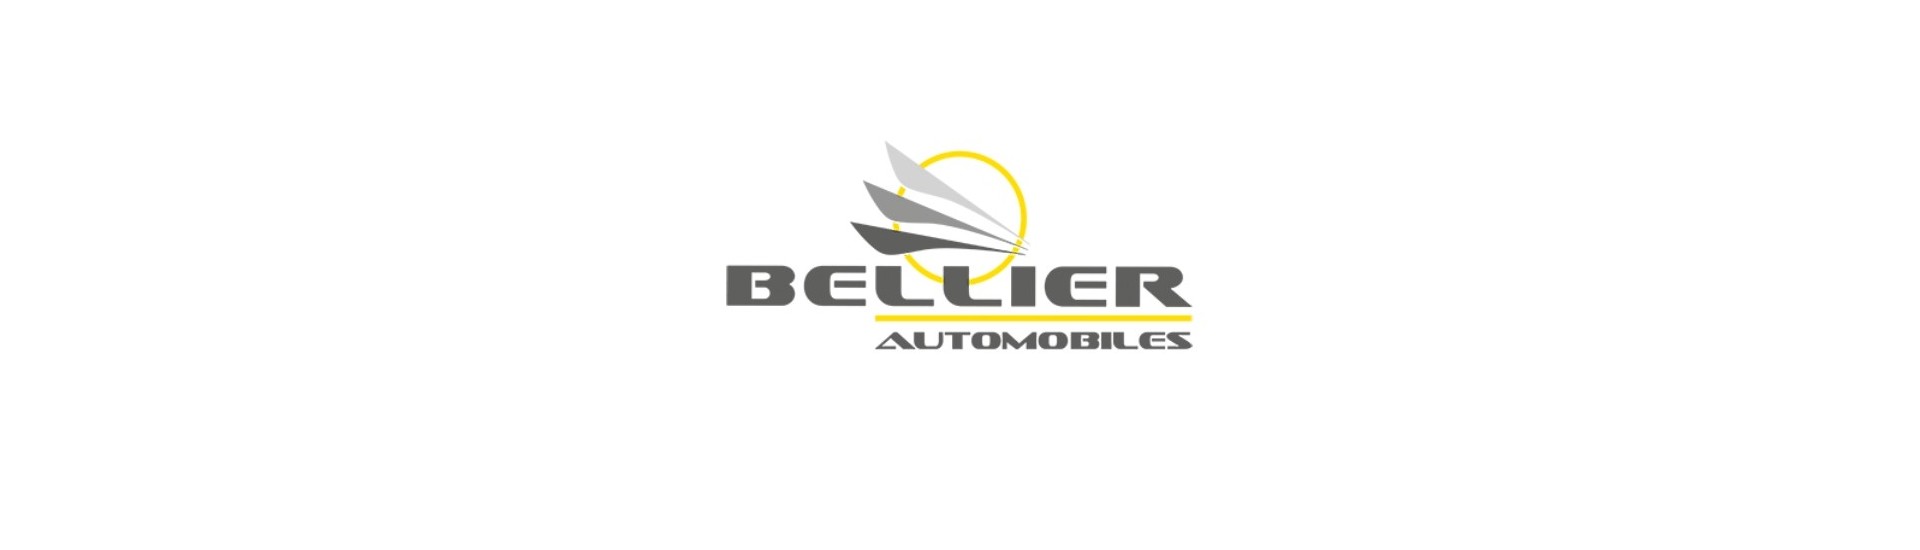 Direction Cremailer at the best car price without a permit Bellier